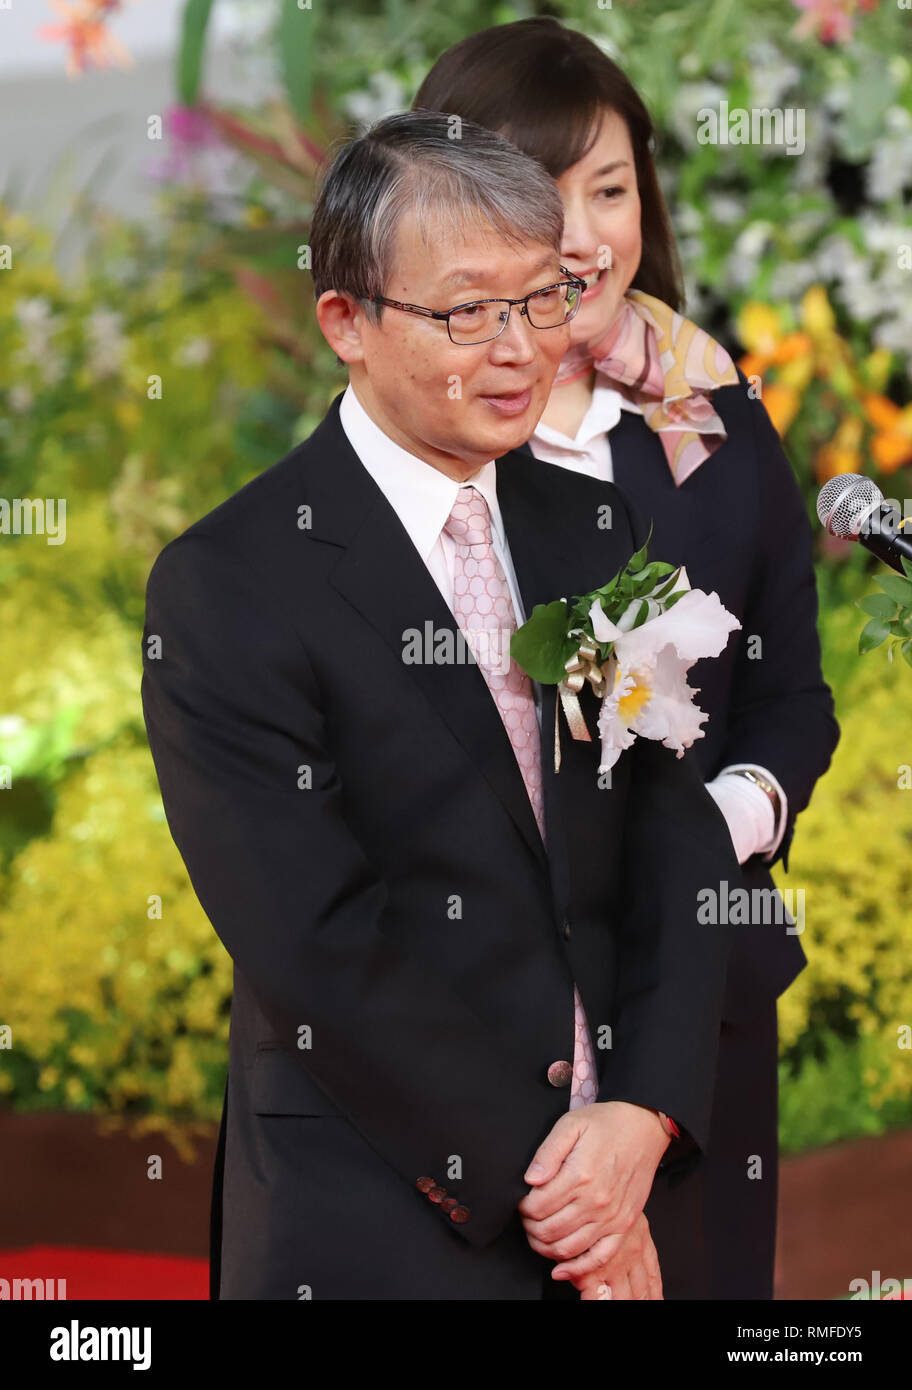 Tokyo, Japan. 15th Feb, 2019. Japan's largest newspaper Yomiuri Shimbun Holdings president Toshikazu Yamaguchi attends the opening ceremony for 'JGP International Orchid and Flower Show' at the Tokyo Dome stadium in Tokyo on Friday, February 15, 2019. The annual flower festival with 3,000 types, 100,000 plants orchids will be held from February 15 through 22. Credit: Yoshio Tsunoda/AFLO/Alamy Live News Stock Photo